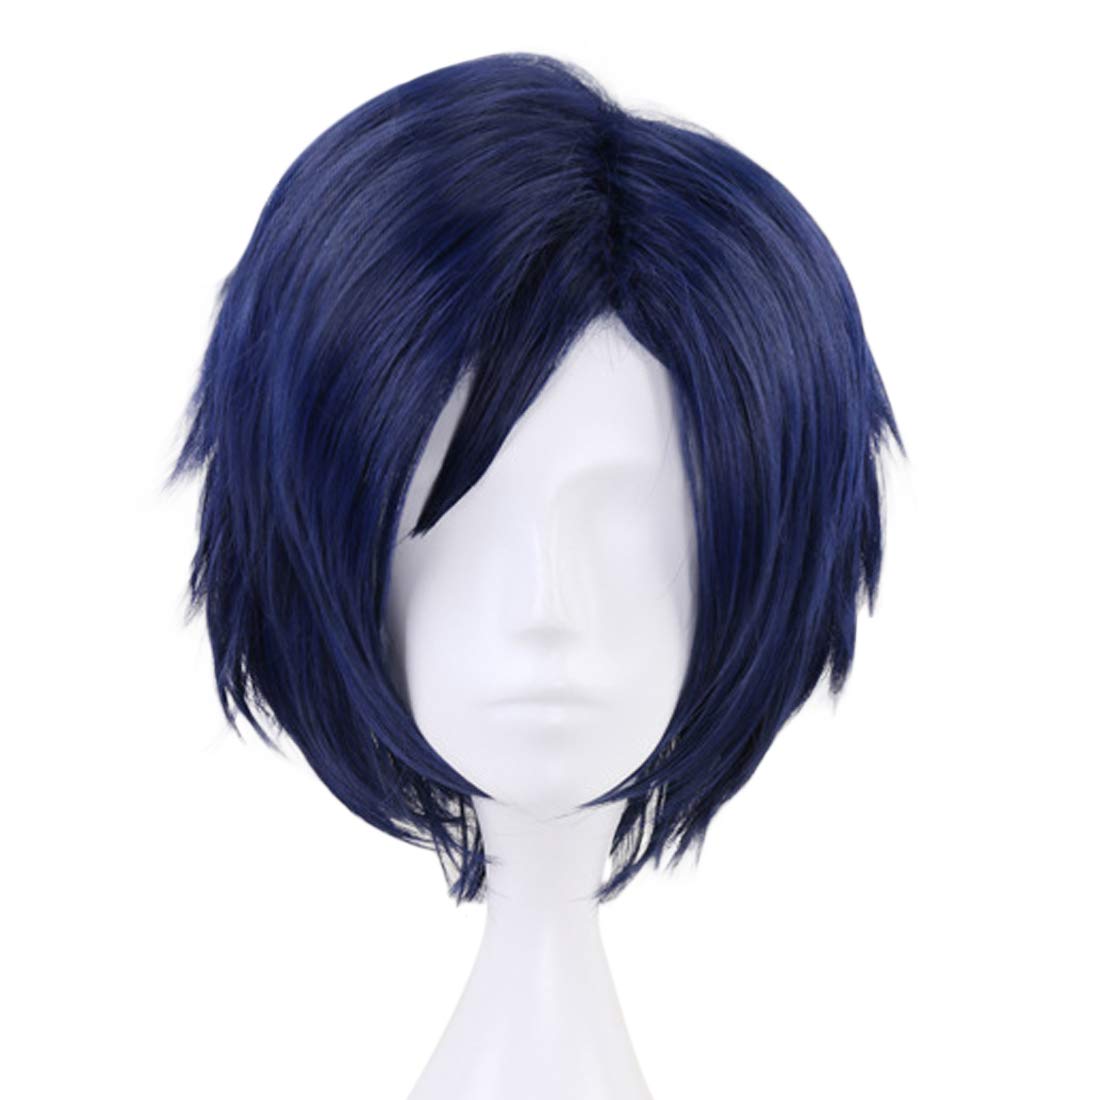 Price:$15.88    JoneTing Synthetic Wig for Men Short Wavy Blue Wigs Cospaly Costume Wig for Halloween  Beauty